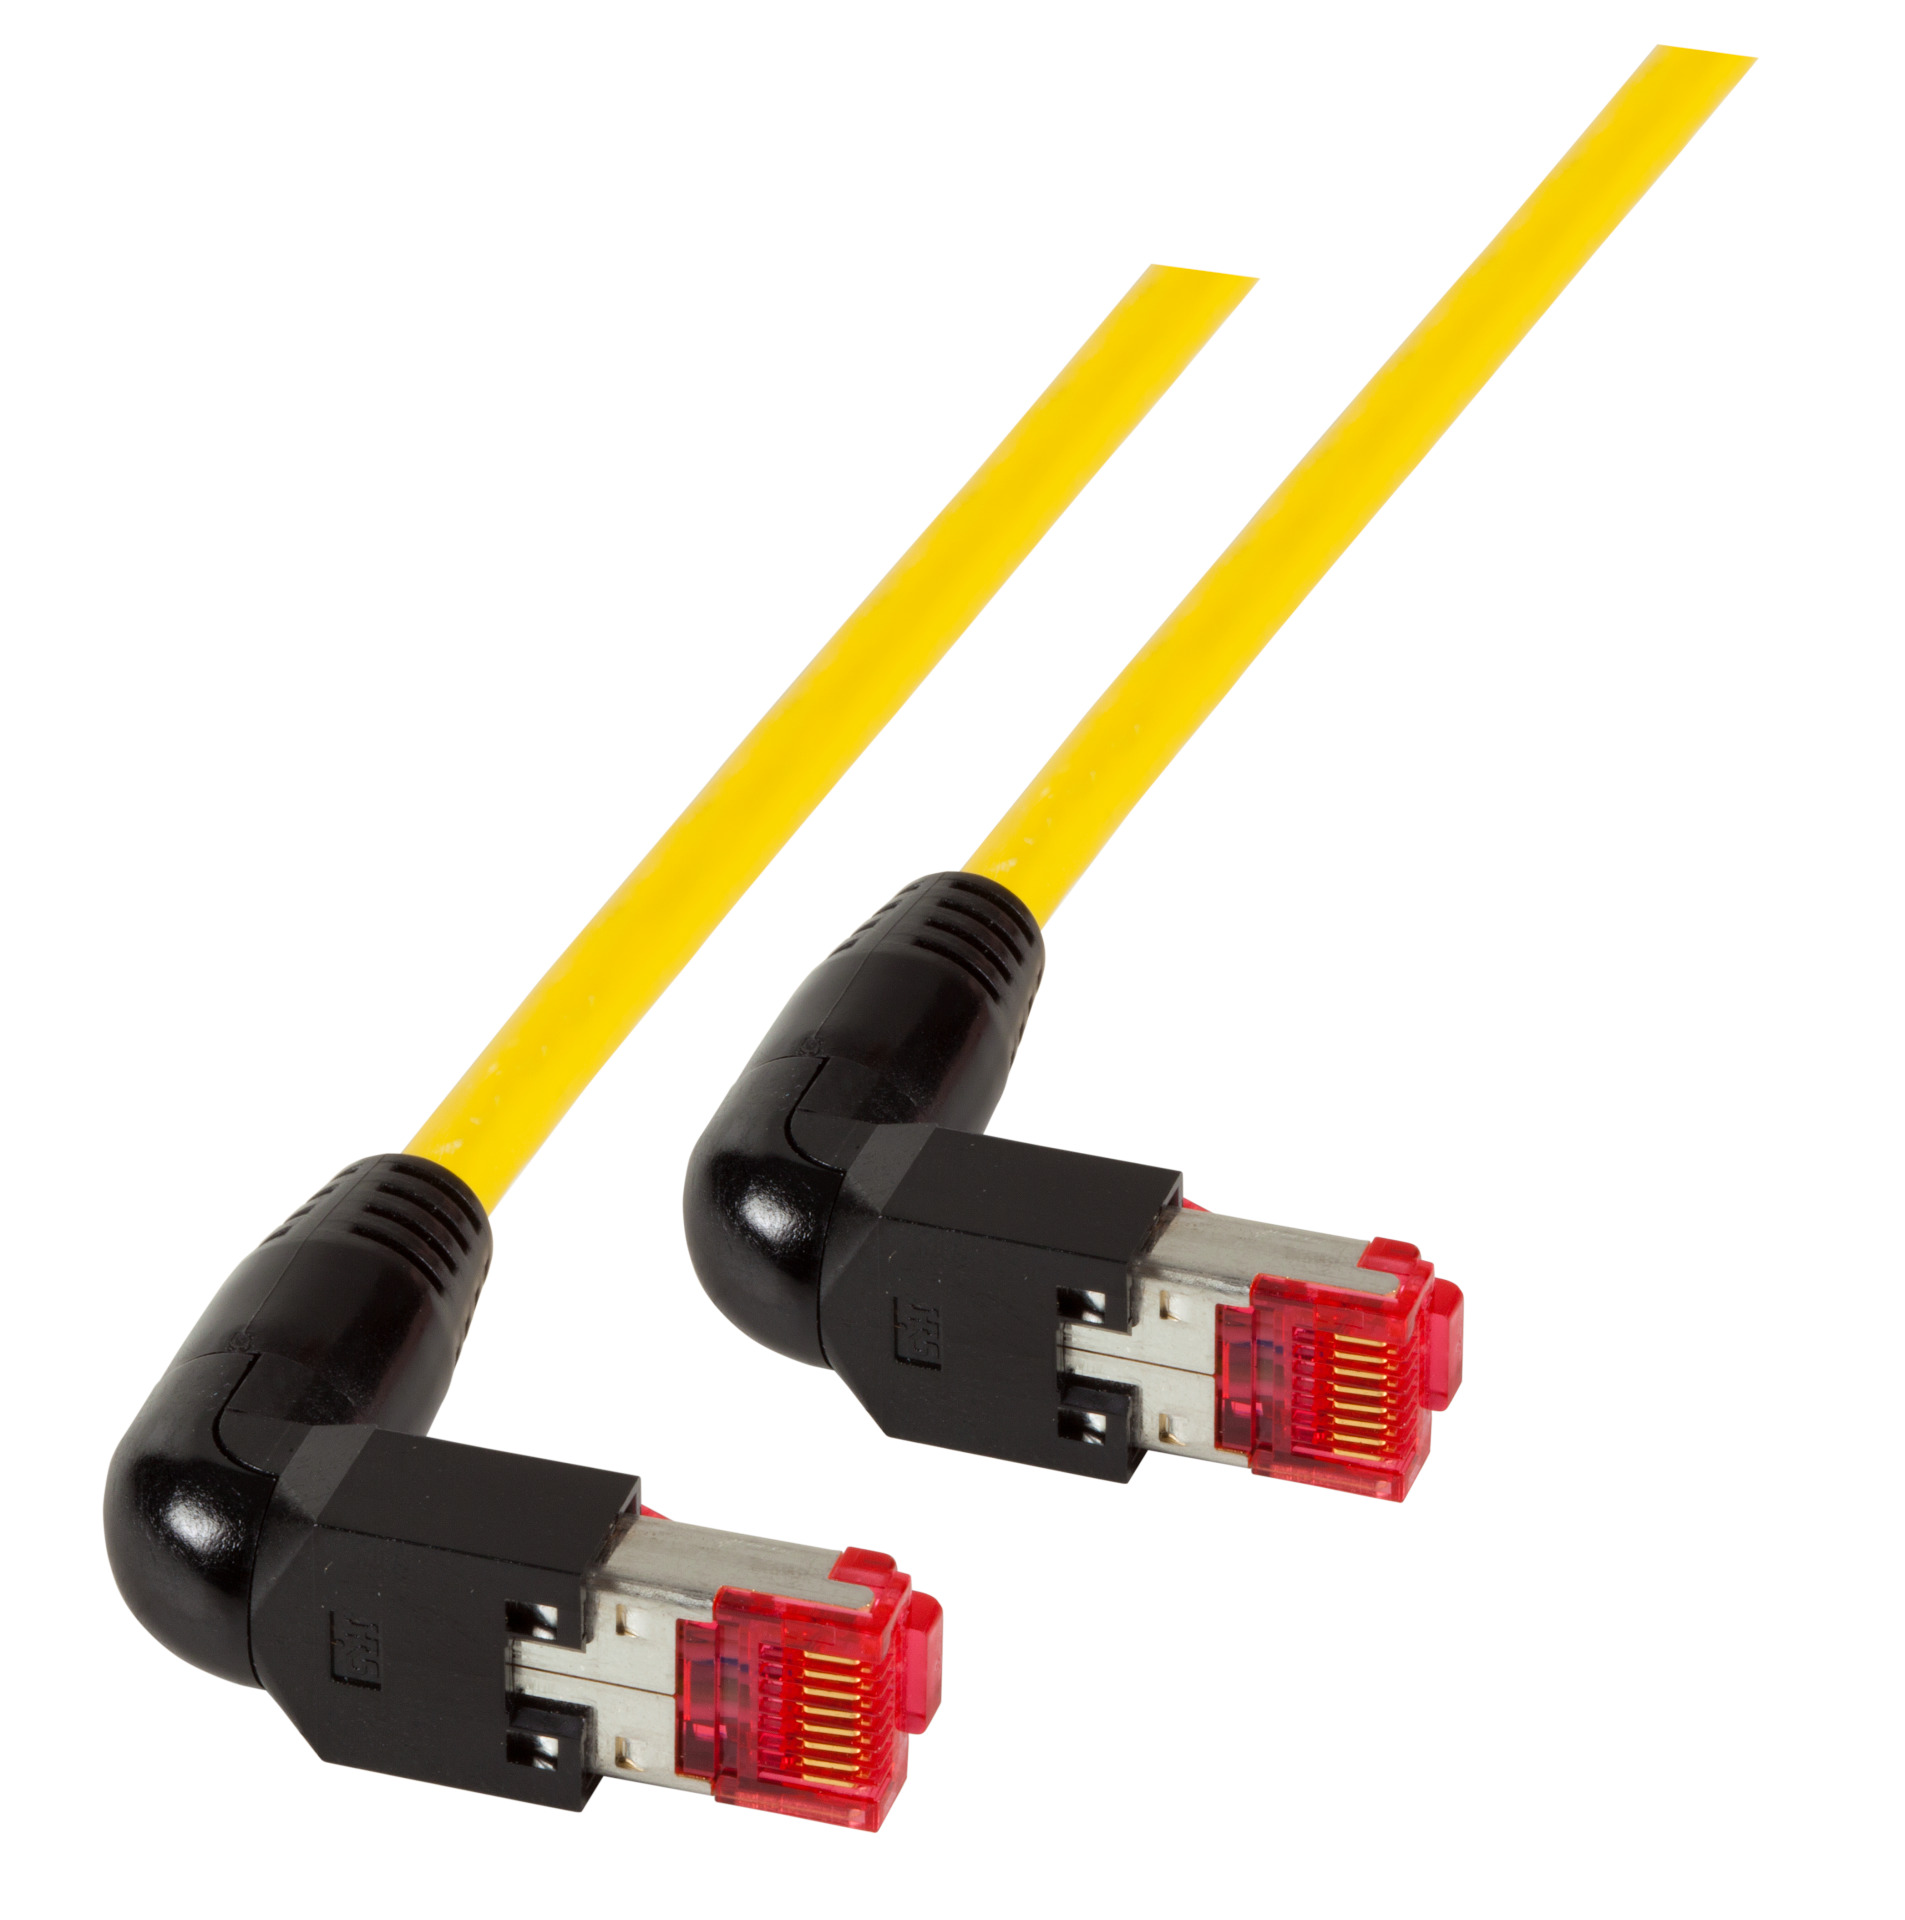 RJ45 Patch cable S/FTP, Cat.6A, 2x TM21 90°, UC900, 1m, yellow